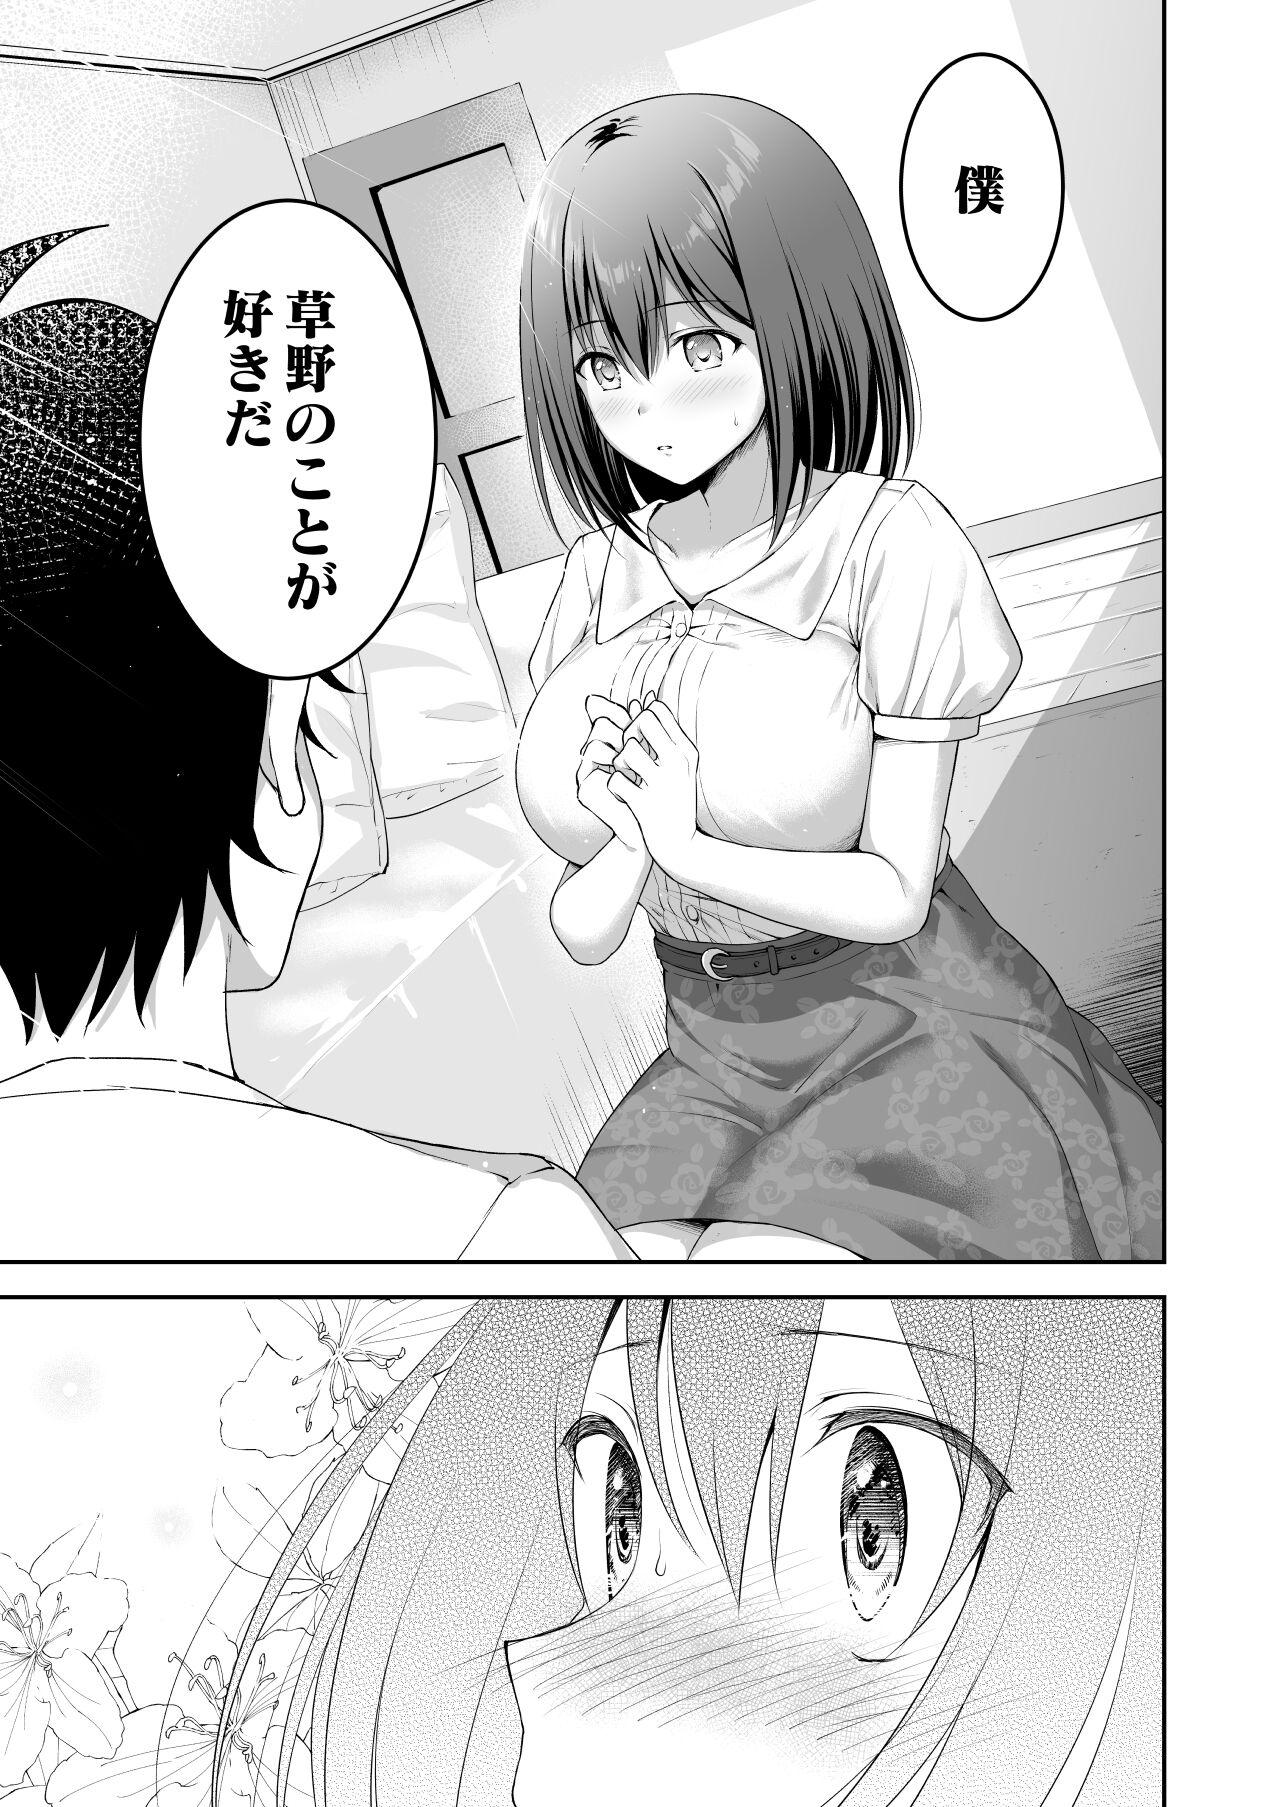 The 優衣コネ - Princess connect Spa - Page 11